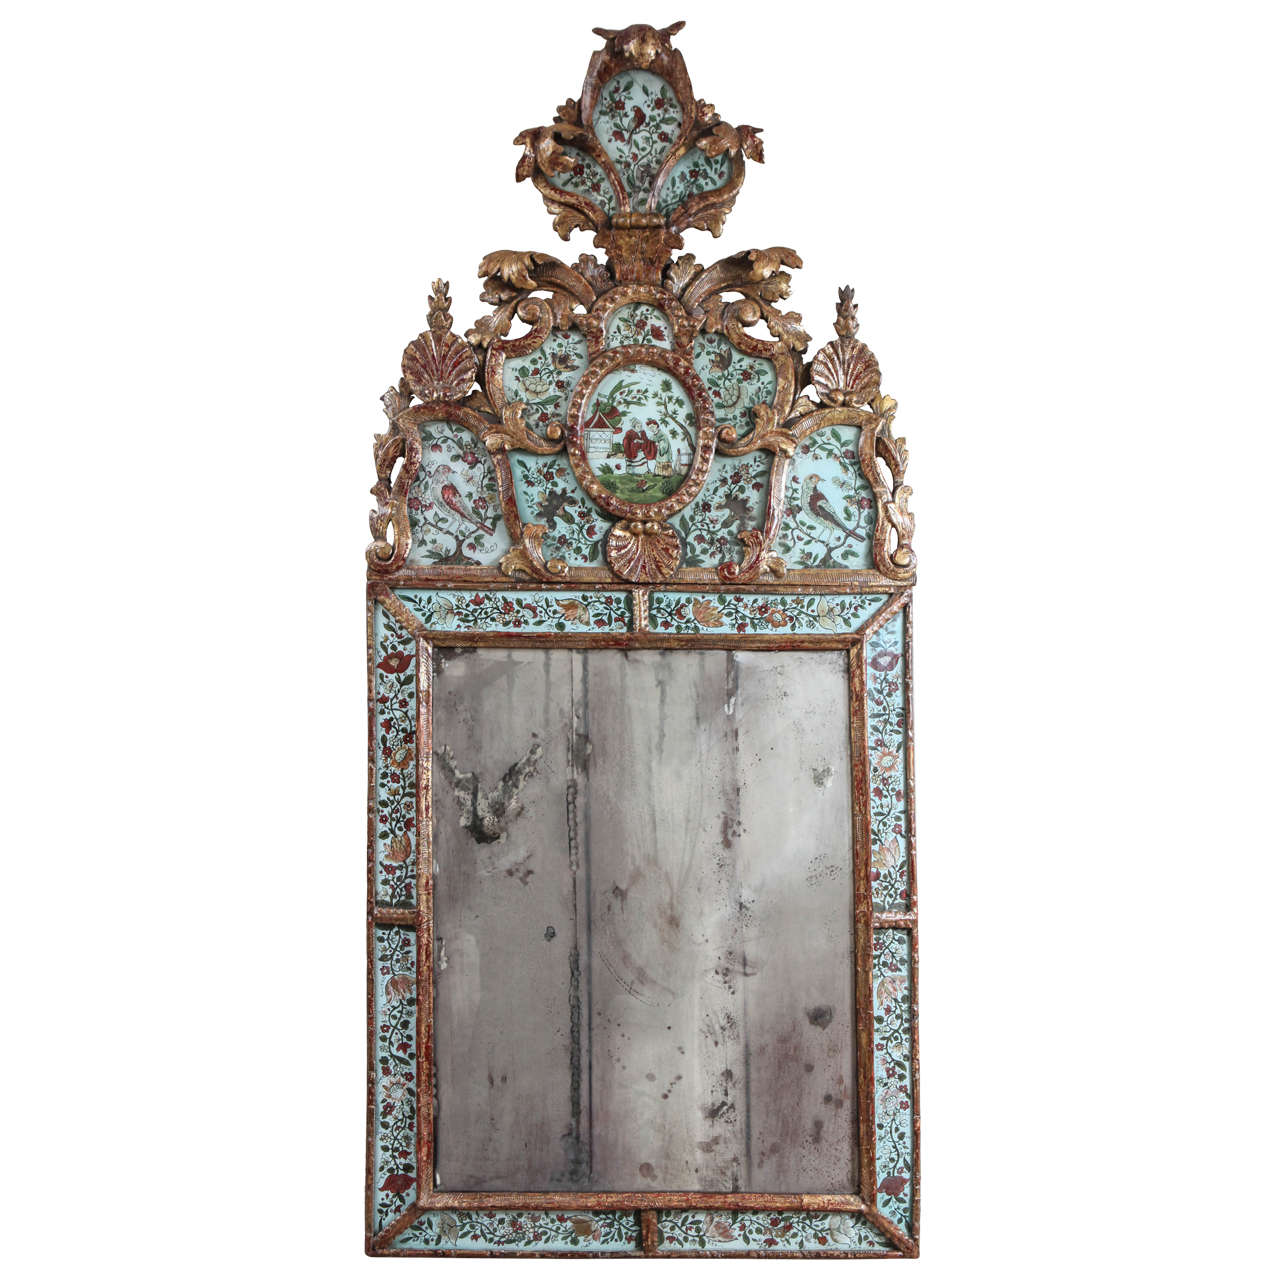 19th c. Italian Giltwood Reverse Painted Glass Mirror